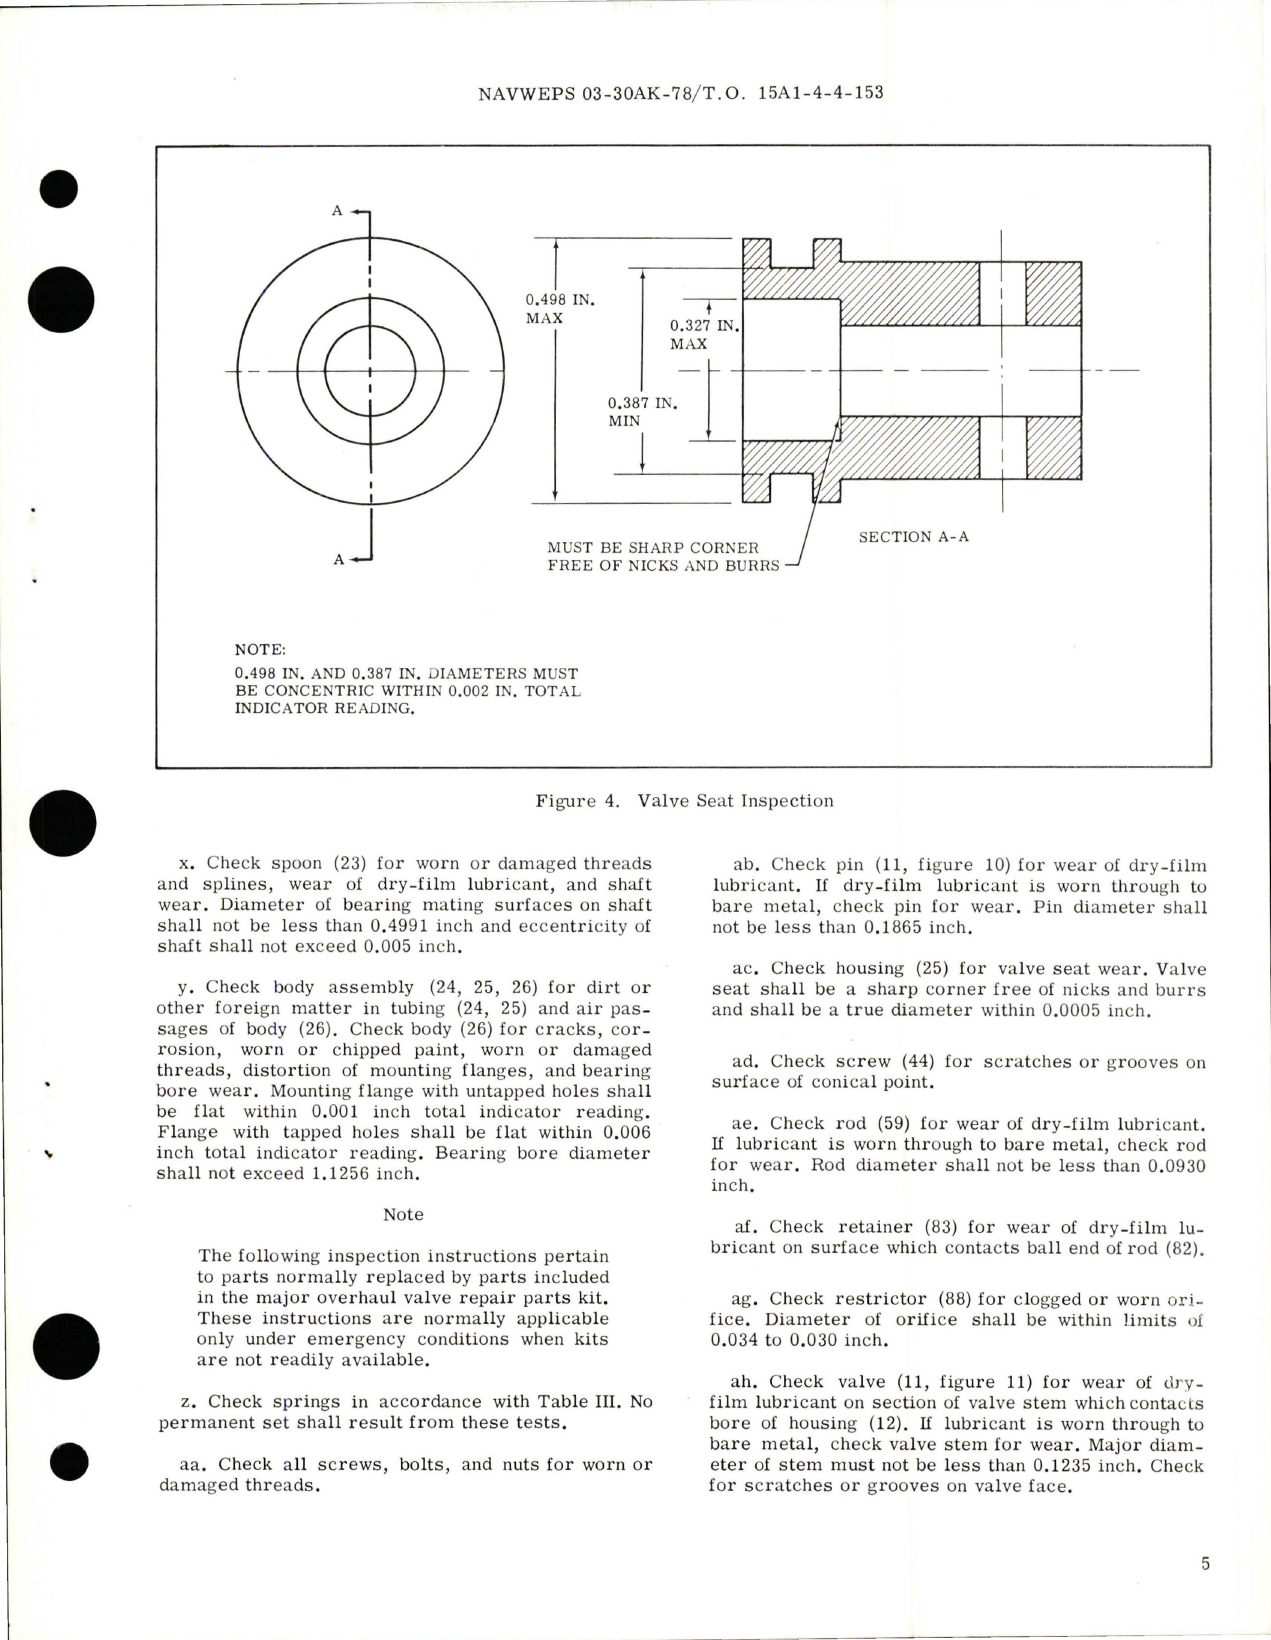 Sample page 7 from AirCorps Library document: Overhaul Instructions with Parts Breakdown for Shutoff Differential Pressure Regulator - 2